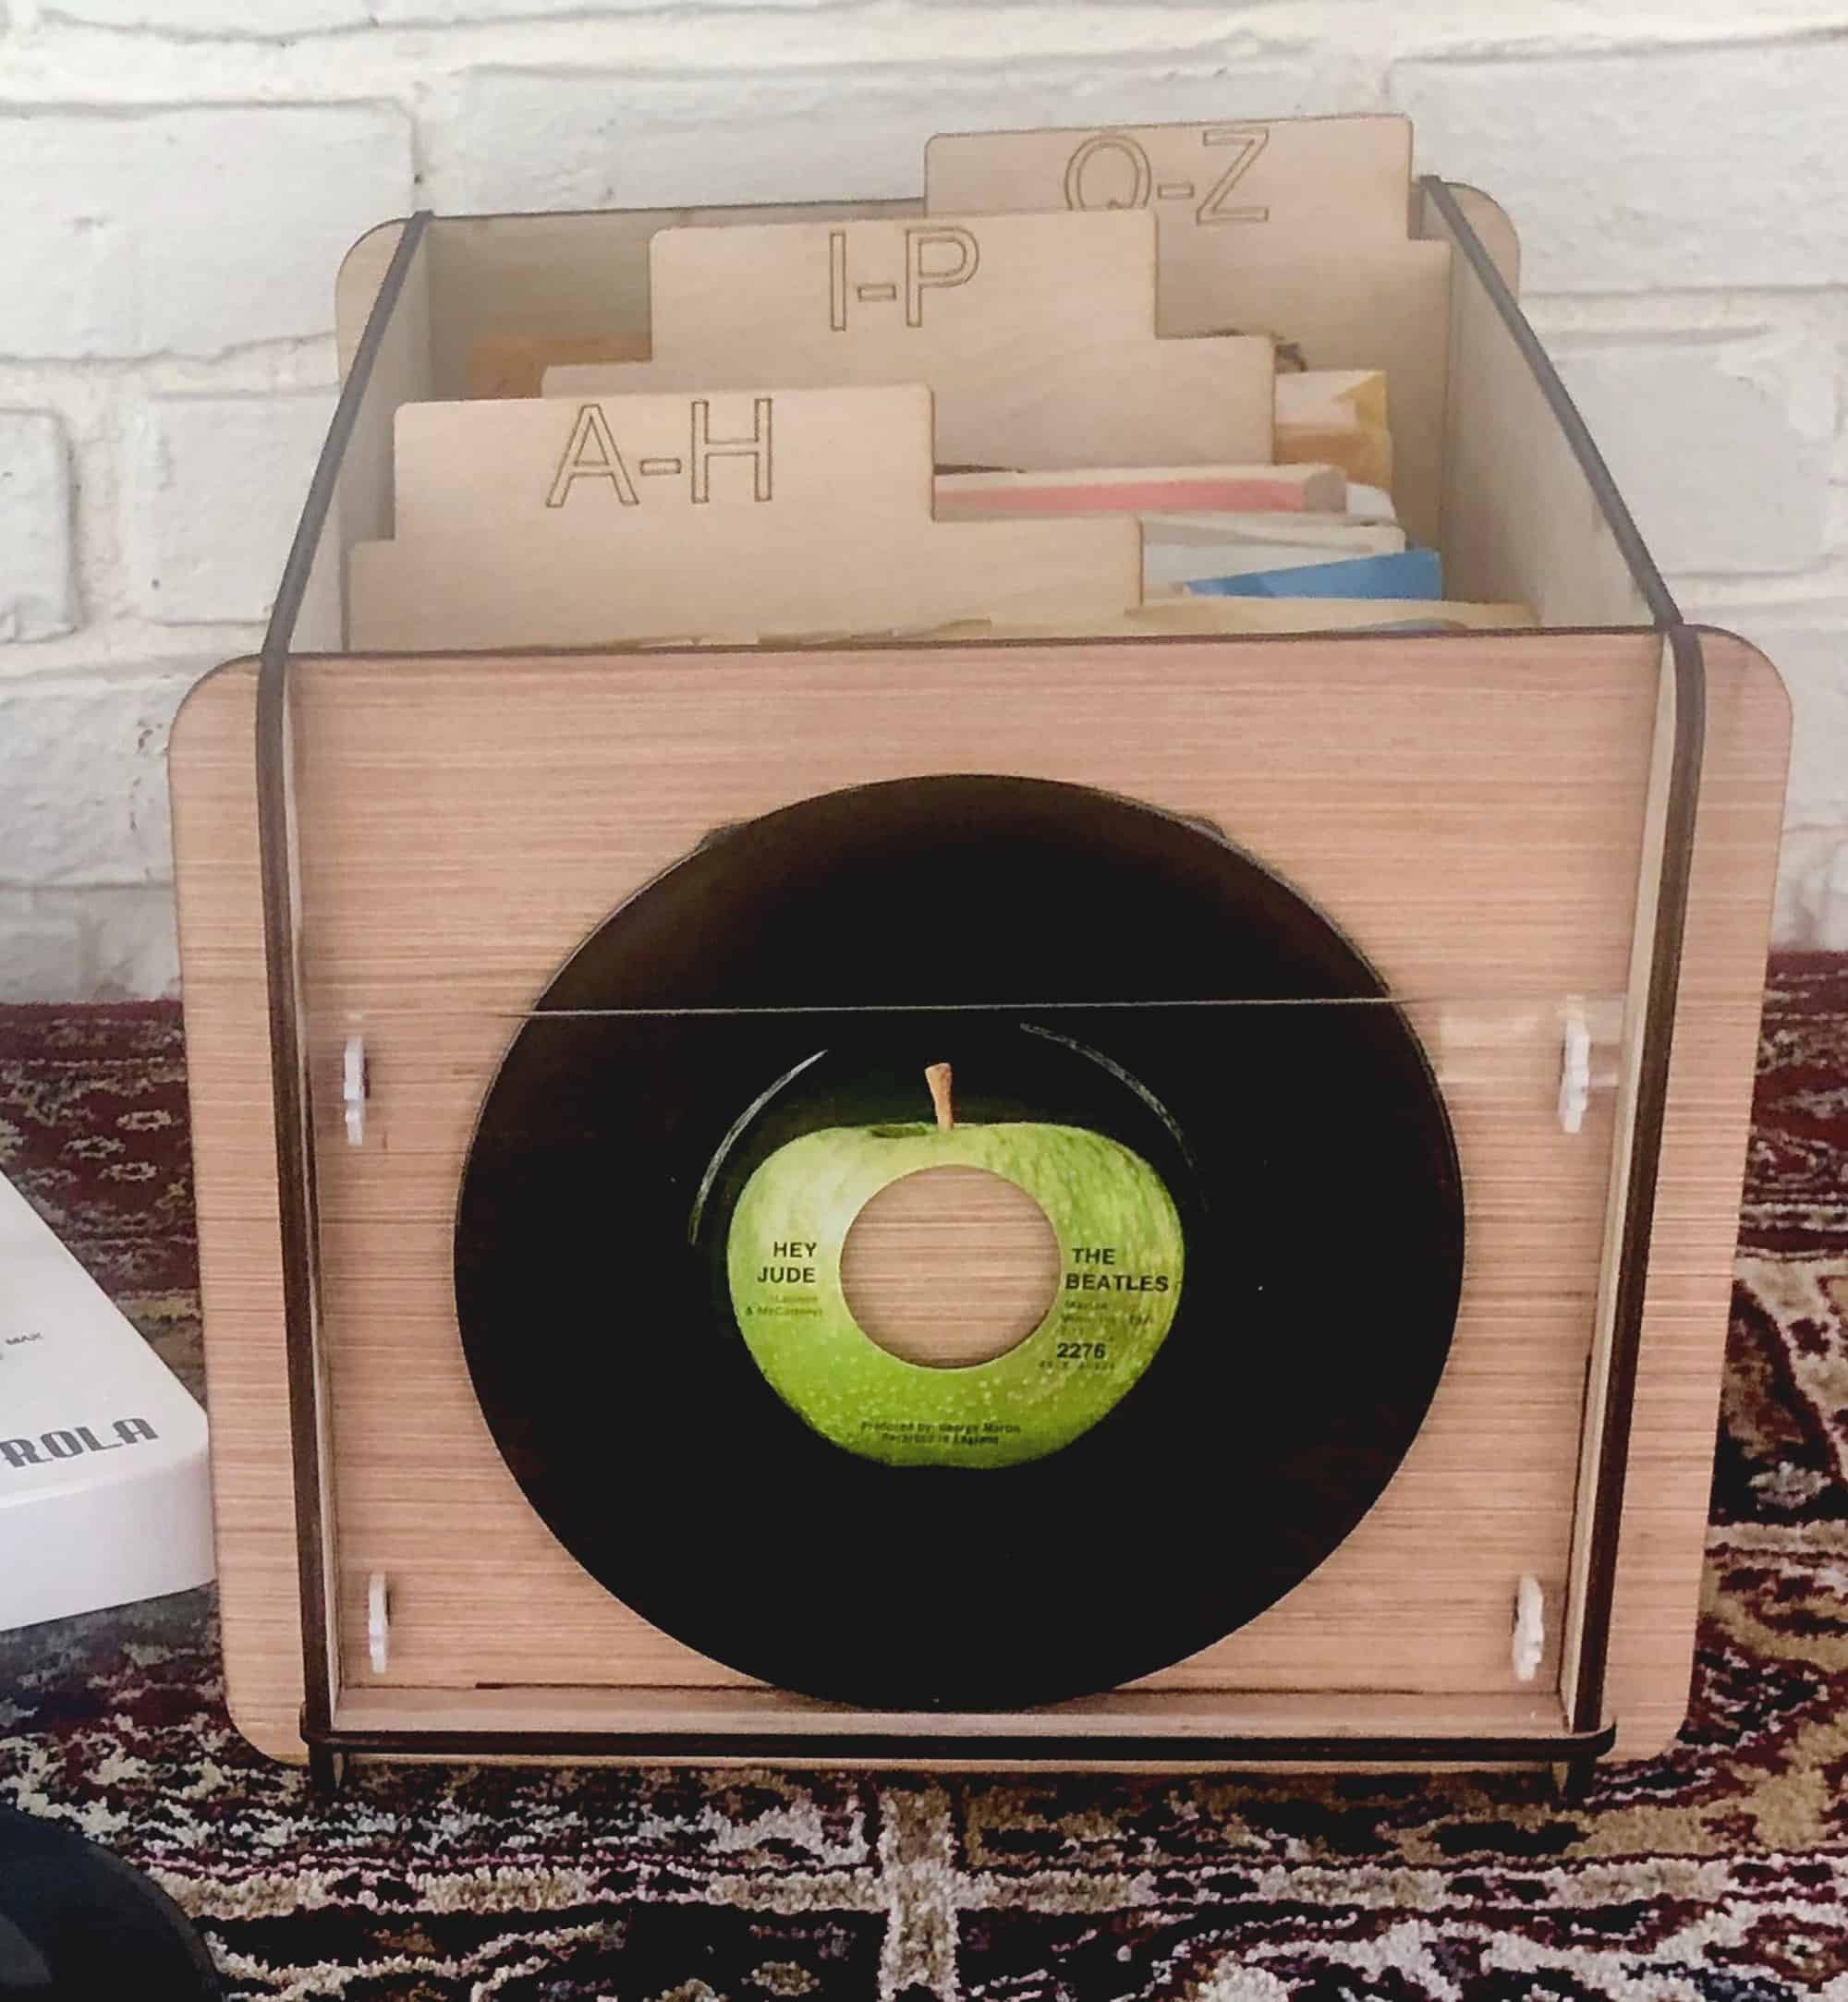 Flower box to hold your 45s